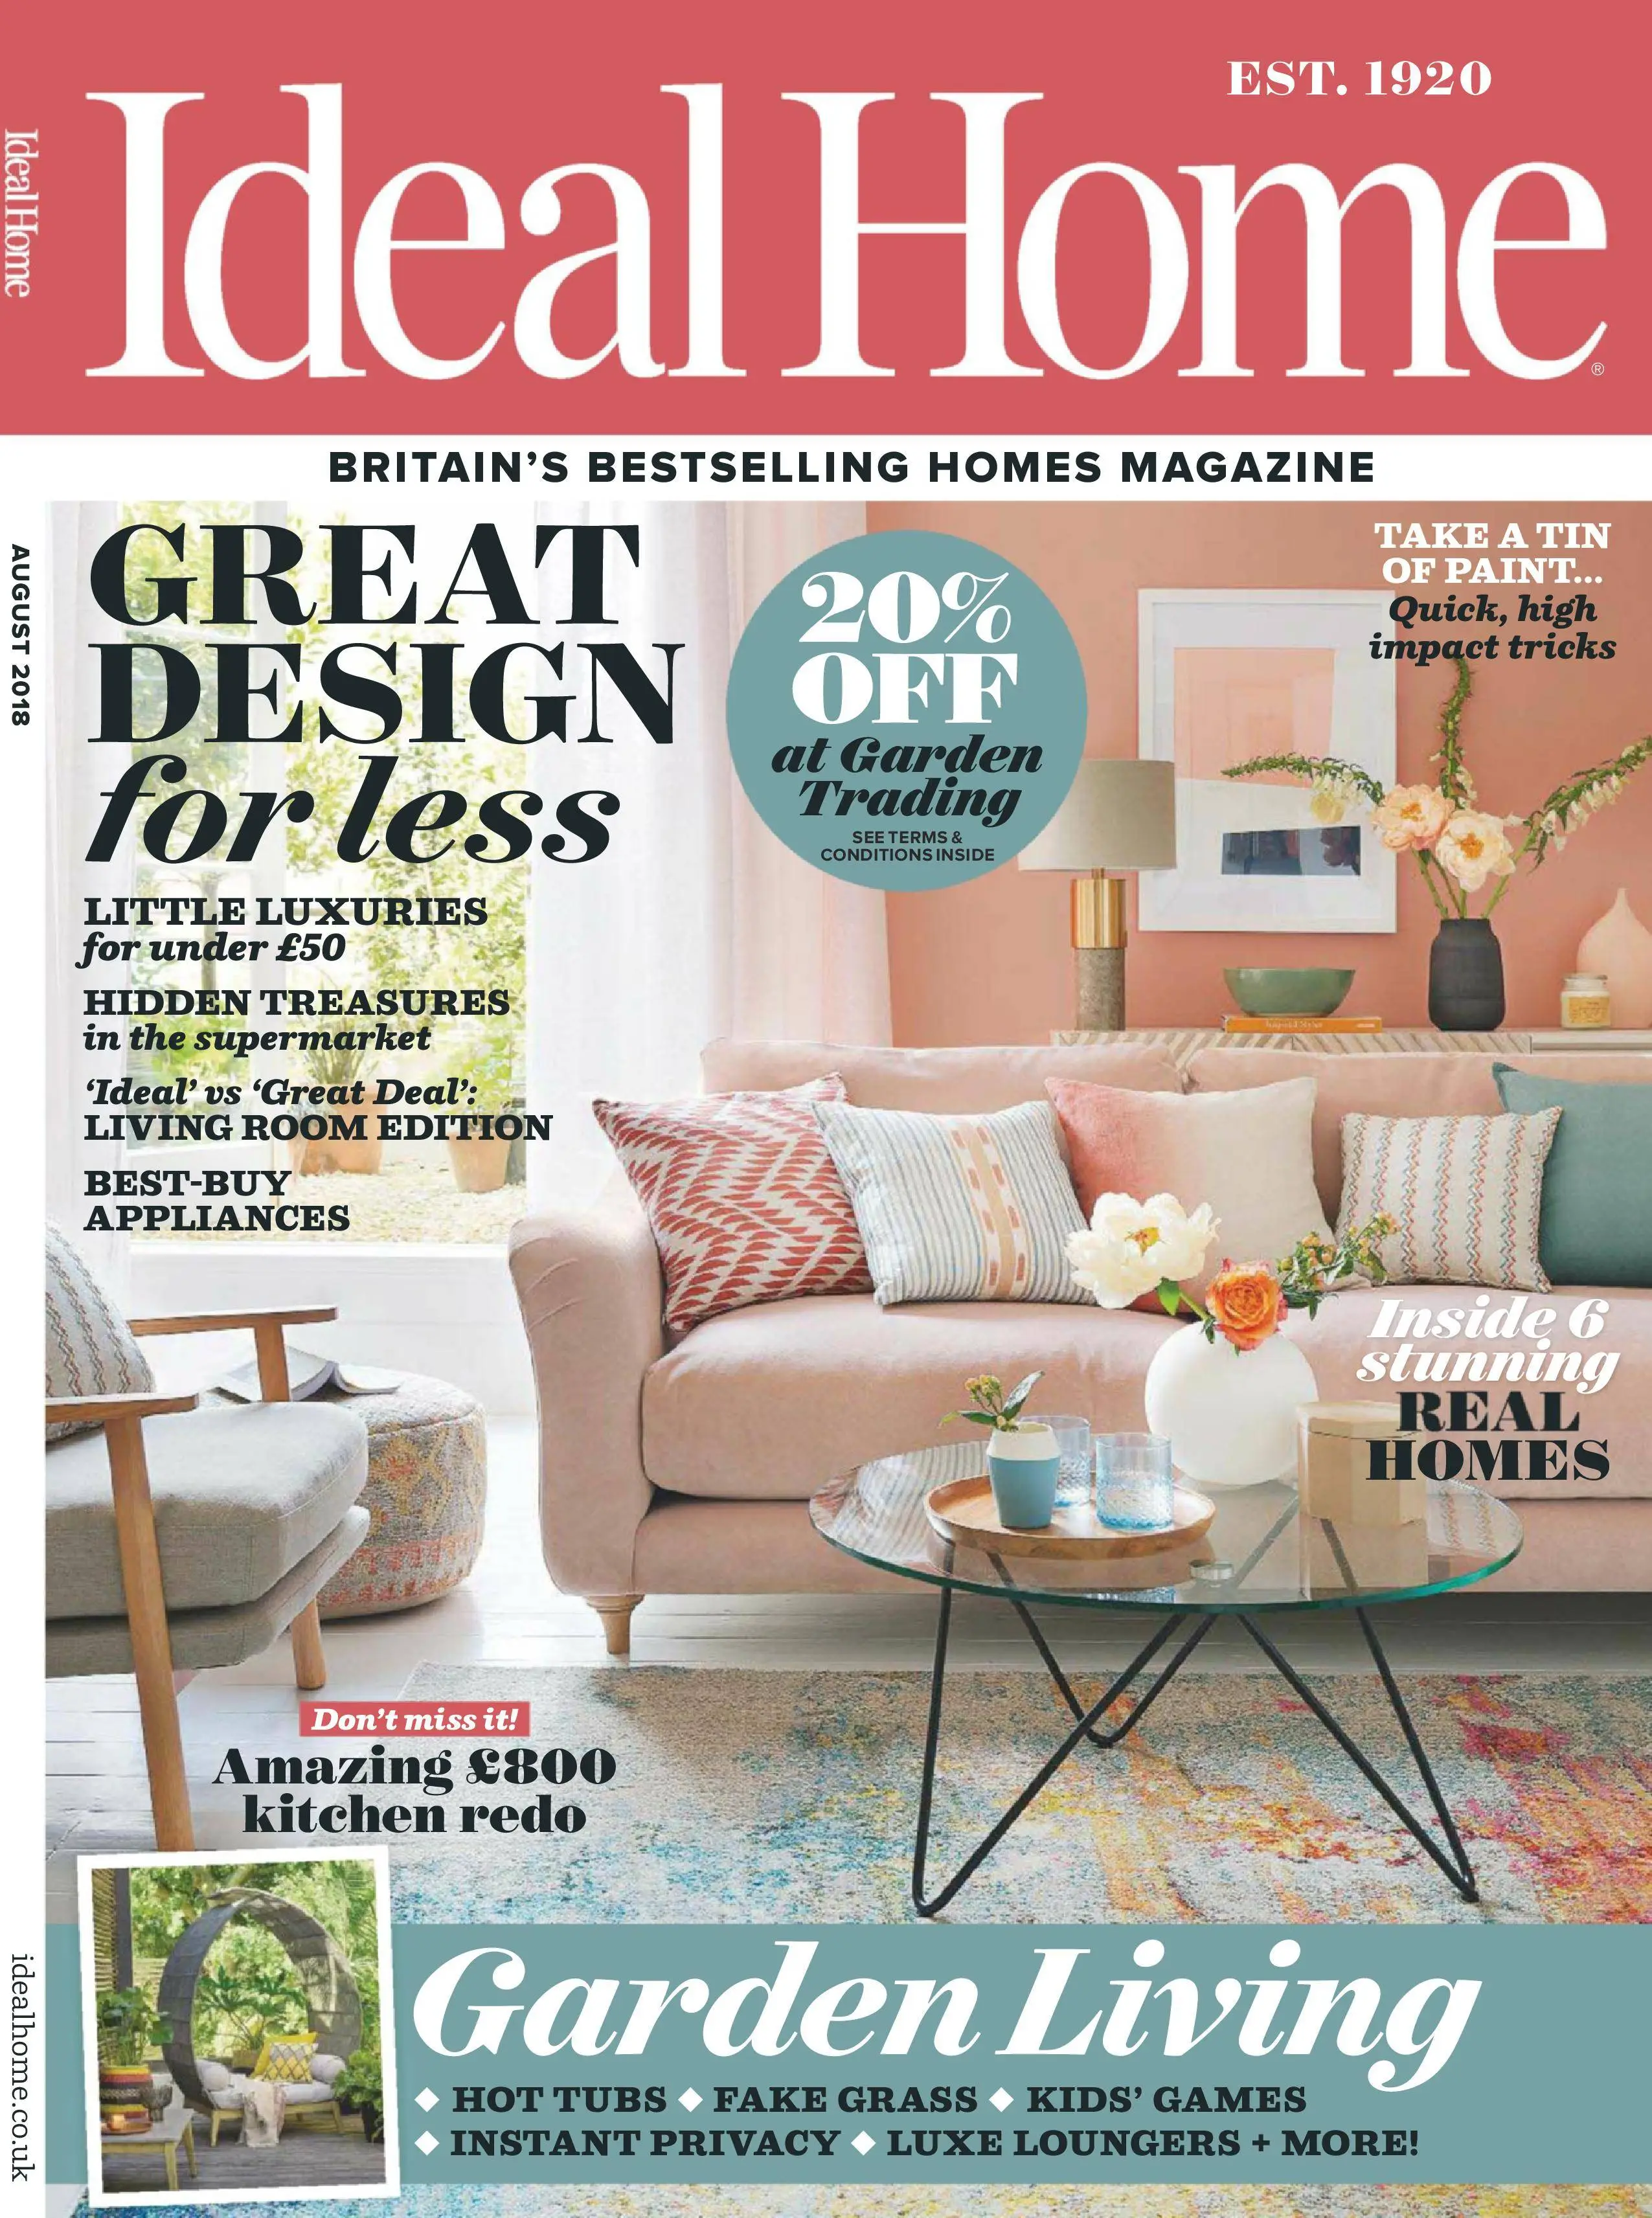 2018 Ideal Home